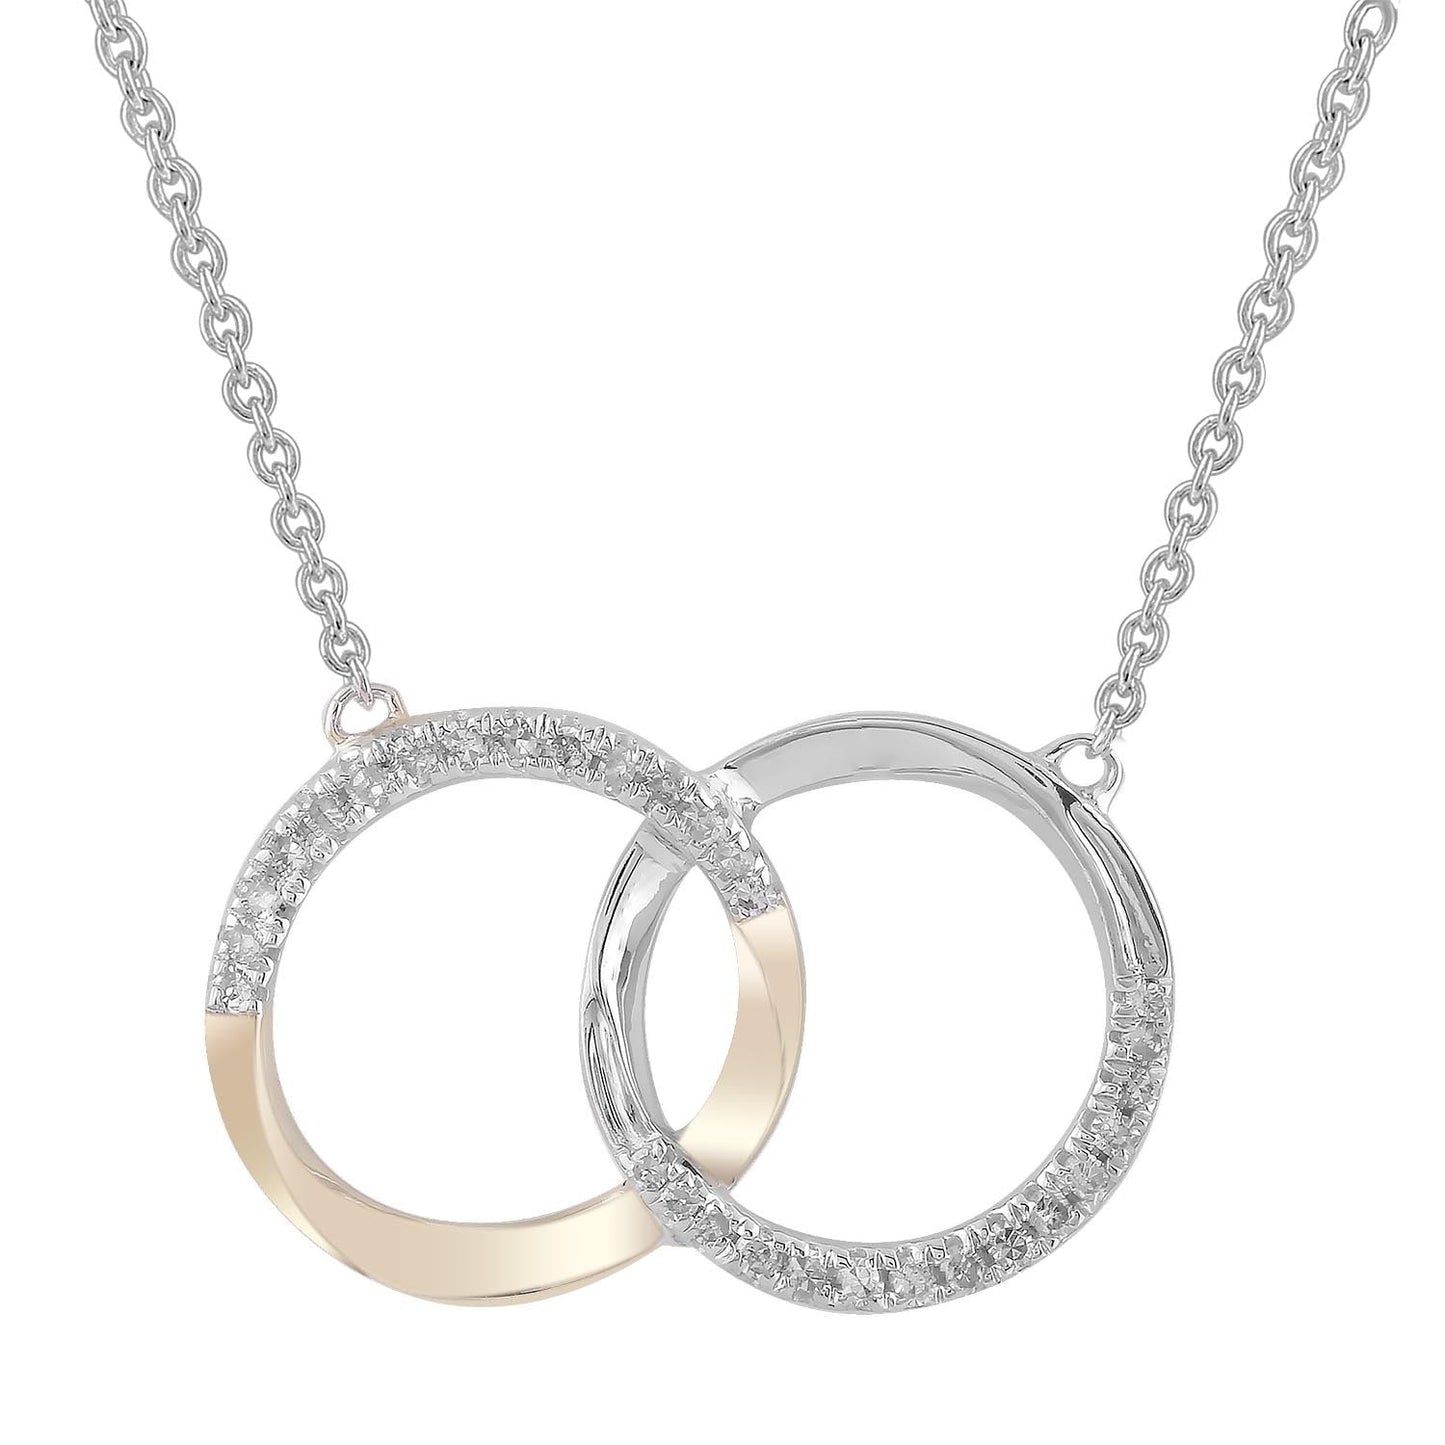 Necklace with 0.10ct Diamonds in 9K Yellow & White Gold